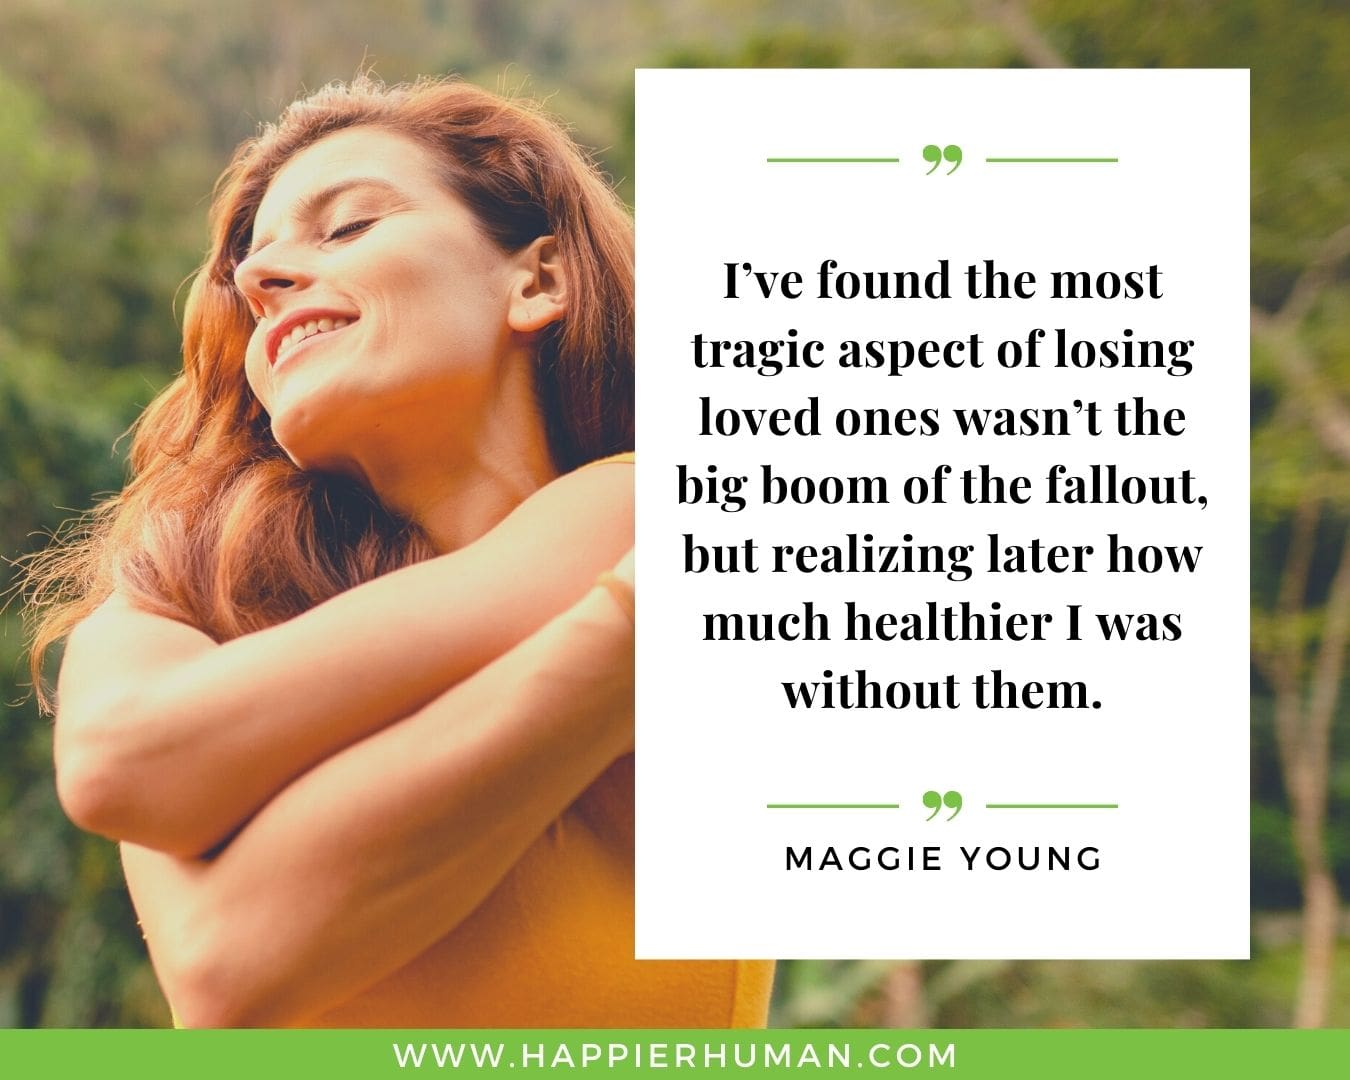 Toxic People Quotes - “I’ve found the most tragic aspect of losing loved ones wasn’t the big boom of the fallout, but realizing later how much healthier I was without them.” – Maggie Young